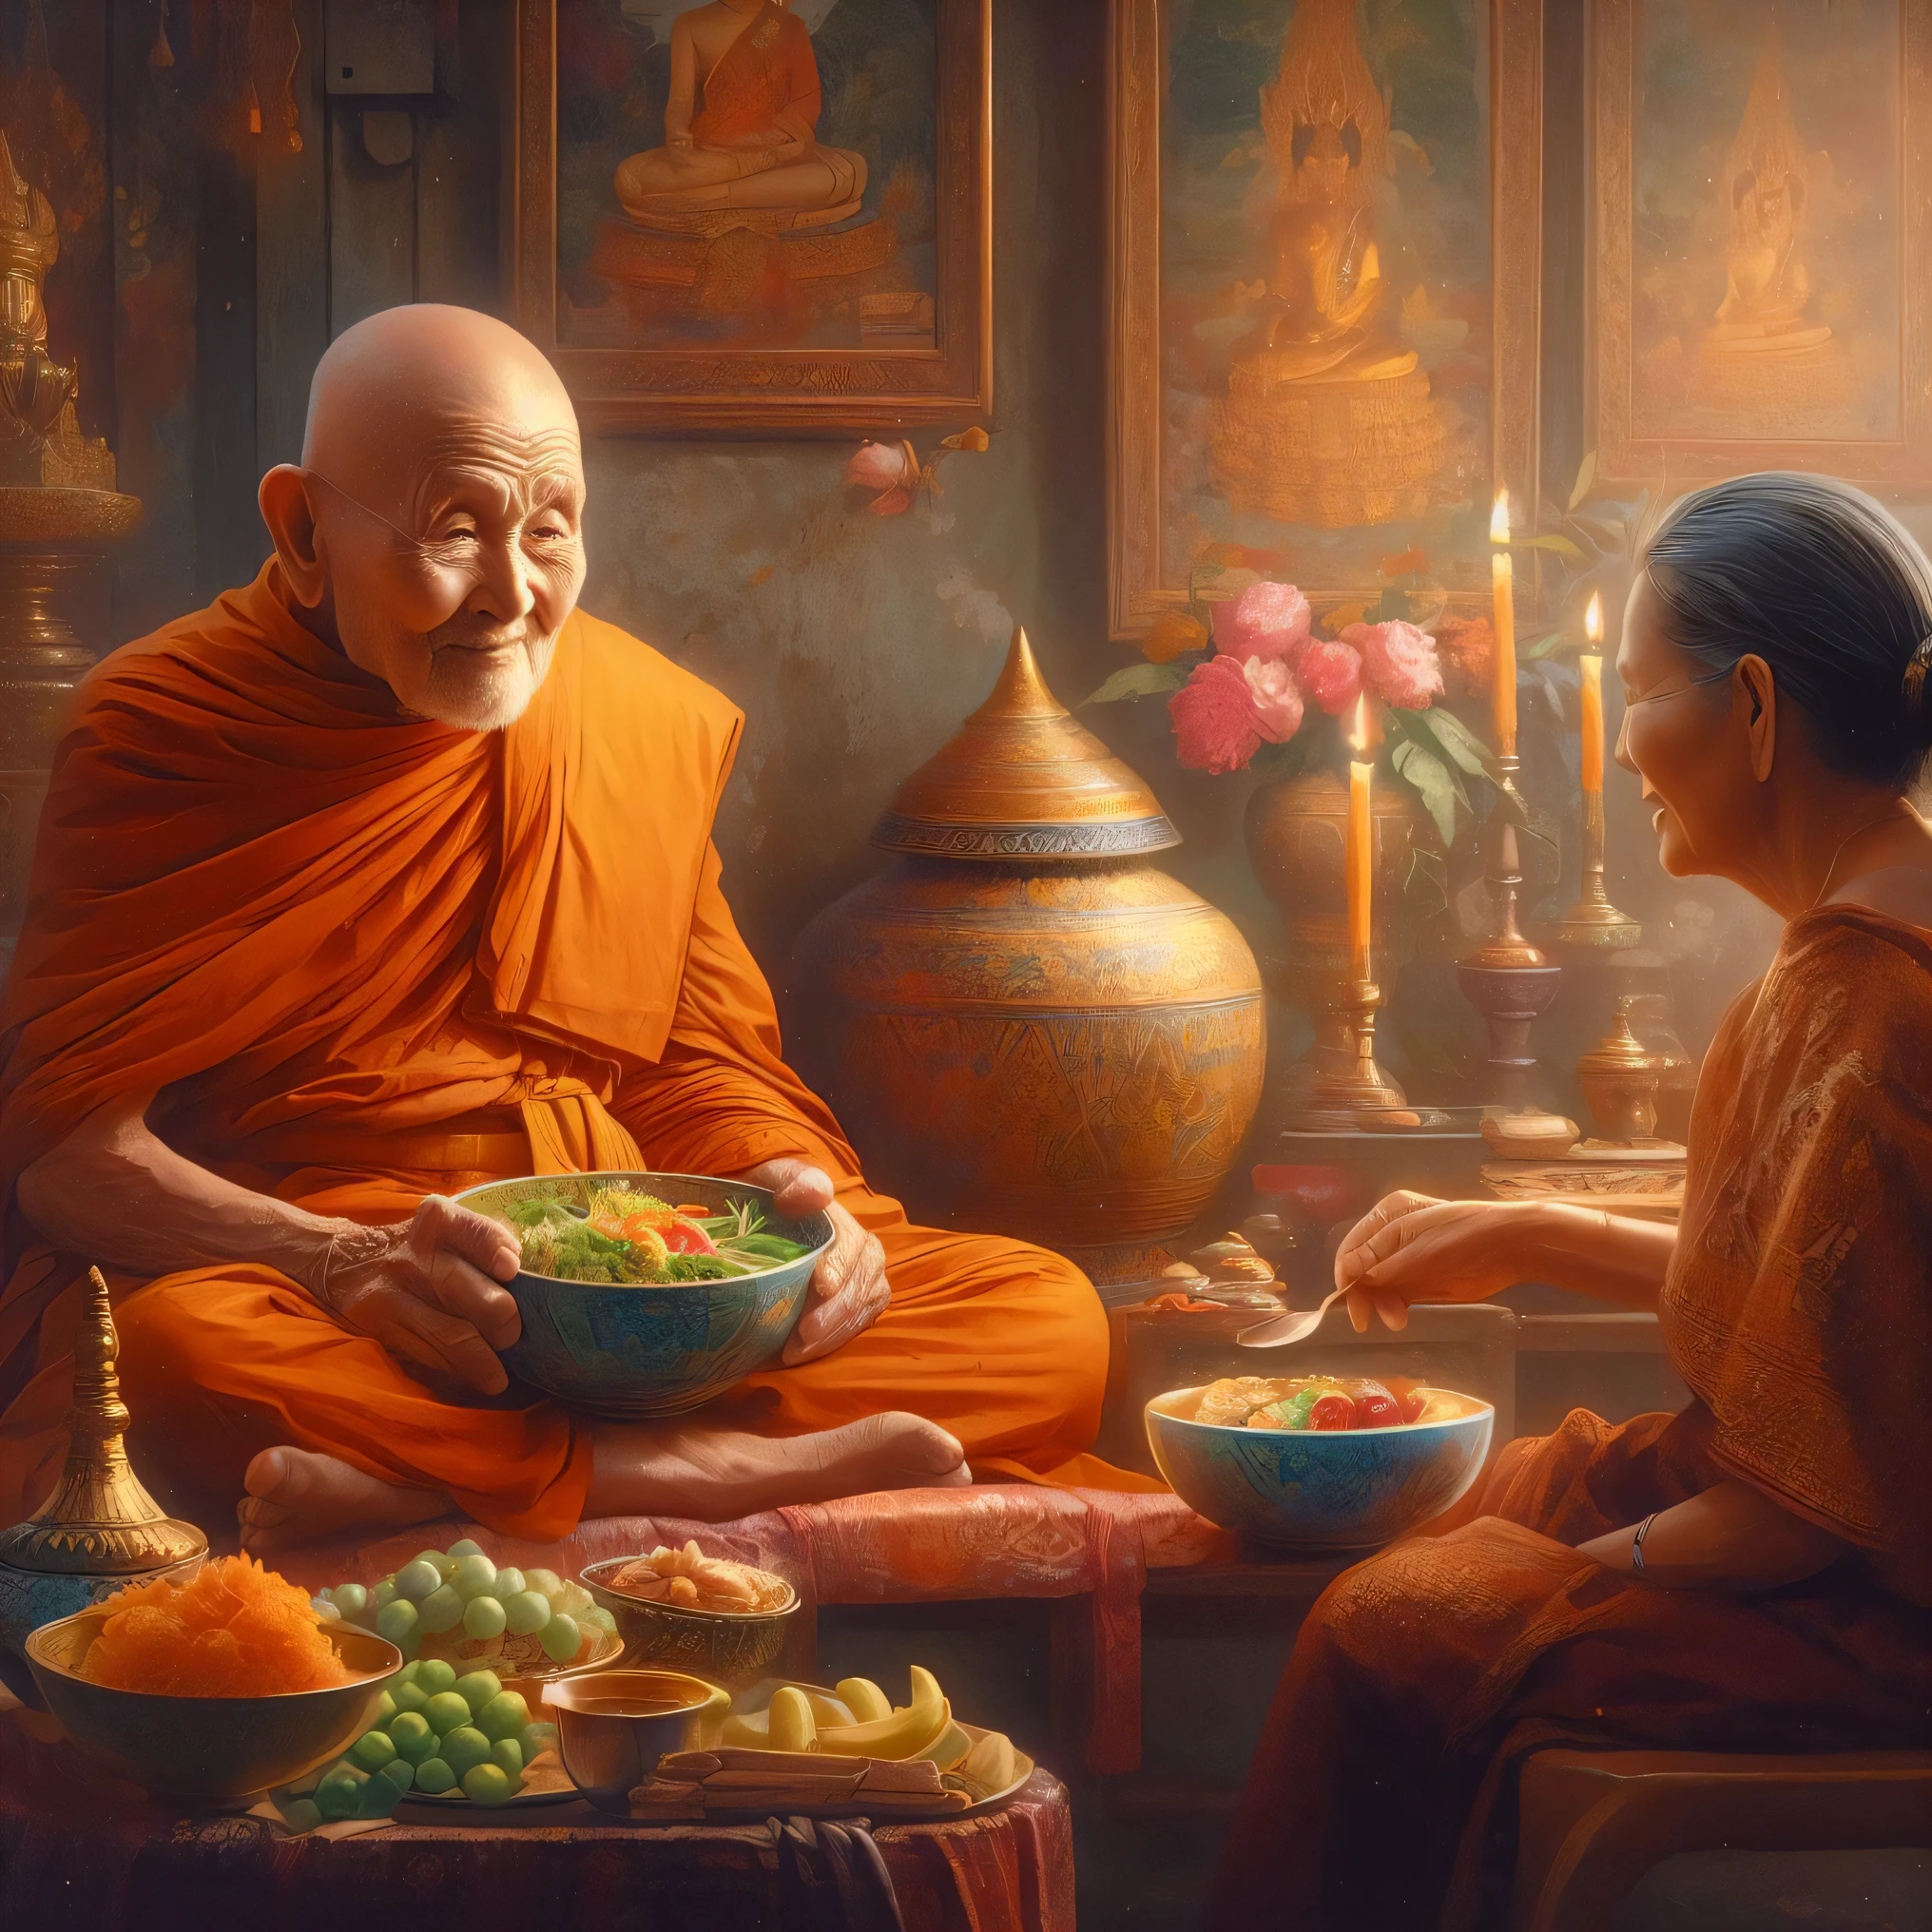 buddhist monk sitting in a room with a bowl of food and a woman, tithi luadthong, by John La Gatta, by Alexander Kucharsky, by Johfra Bosschart, by James Gurney, by Harrington Mann, thailand art, buddhist monk, by Galen Dara, buddhist, by Pablo Munoz Gomez, buddhism